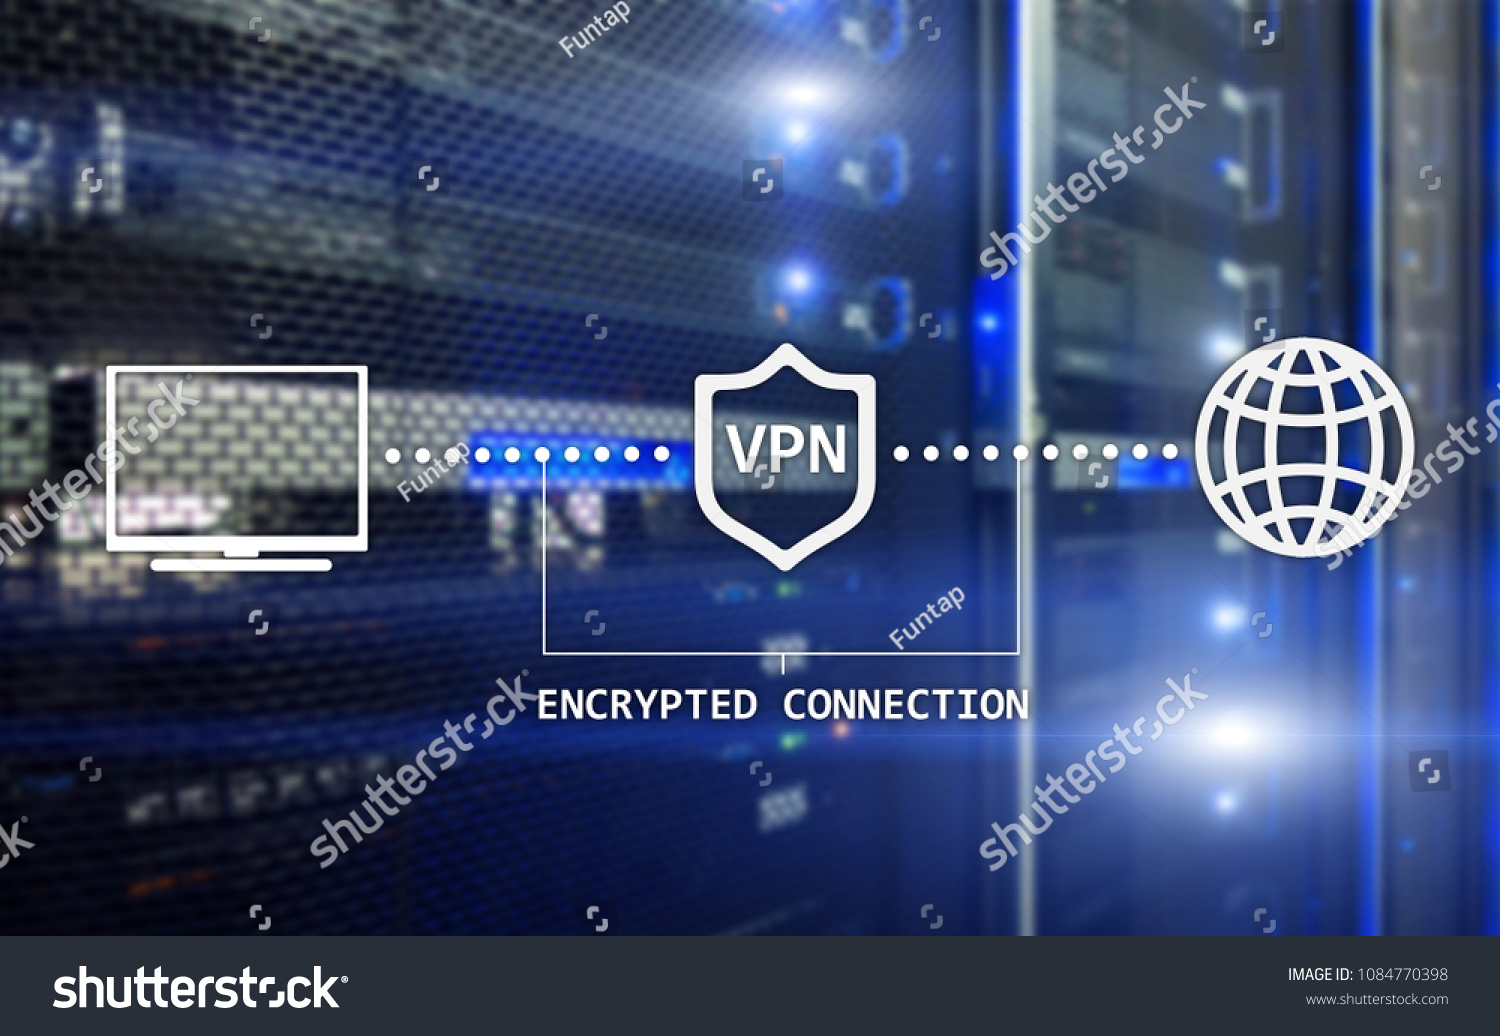 Virtual private network, VPN, Data encryption, IP substitute. #1084770398